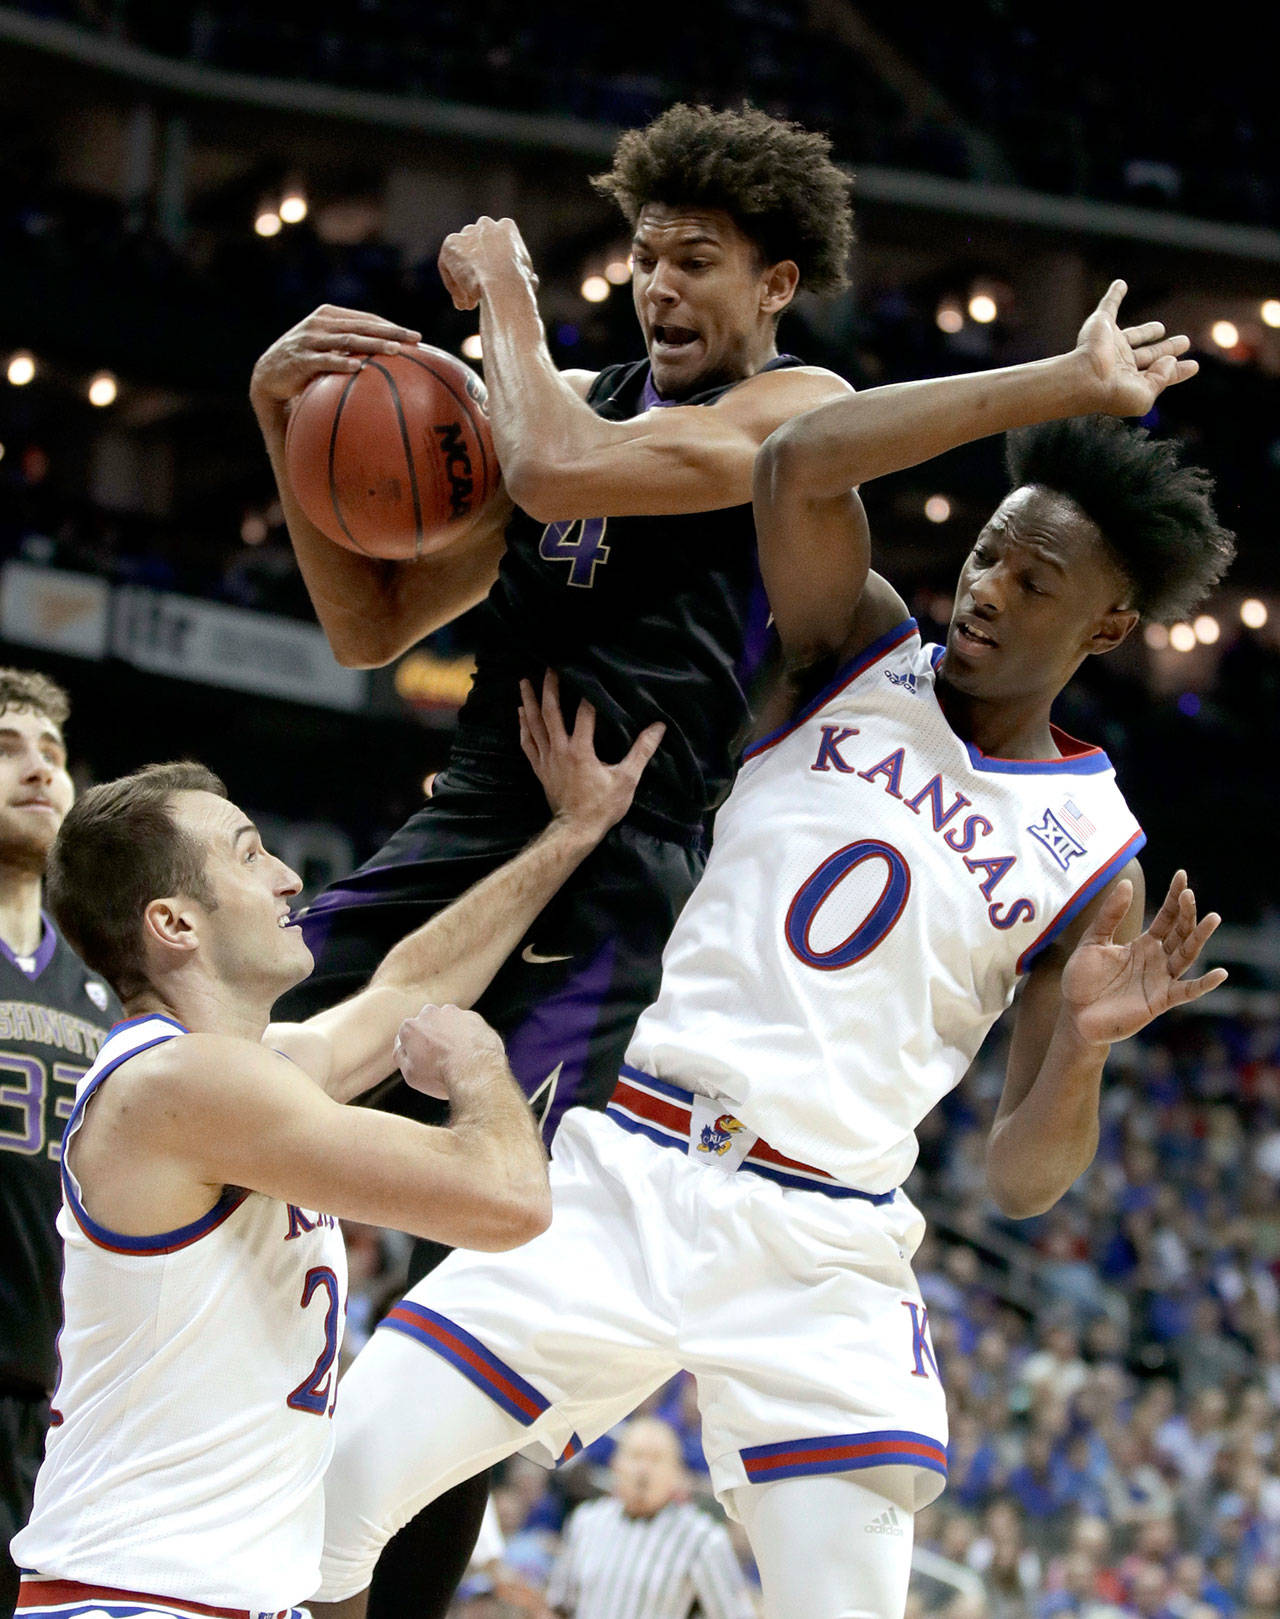 Washington’s Matisse Thybulle beats Kansas’ Clay Young (left) and Marcus Garrett to a rebound during the first half of Wednesday’s game in Kansas City, Mo. (AP Photo/Charlie Riedel)